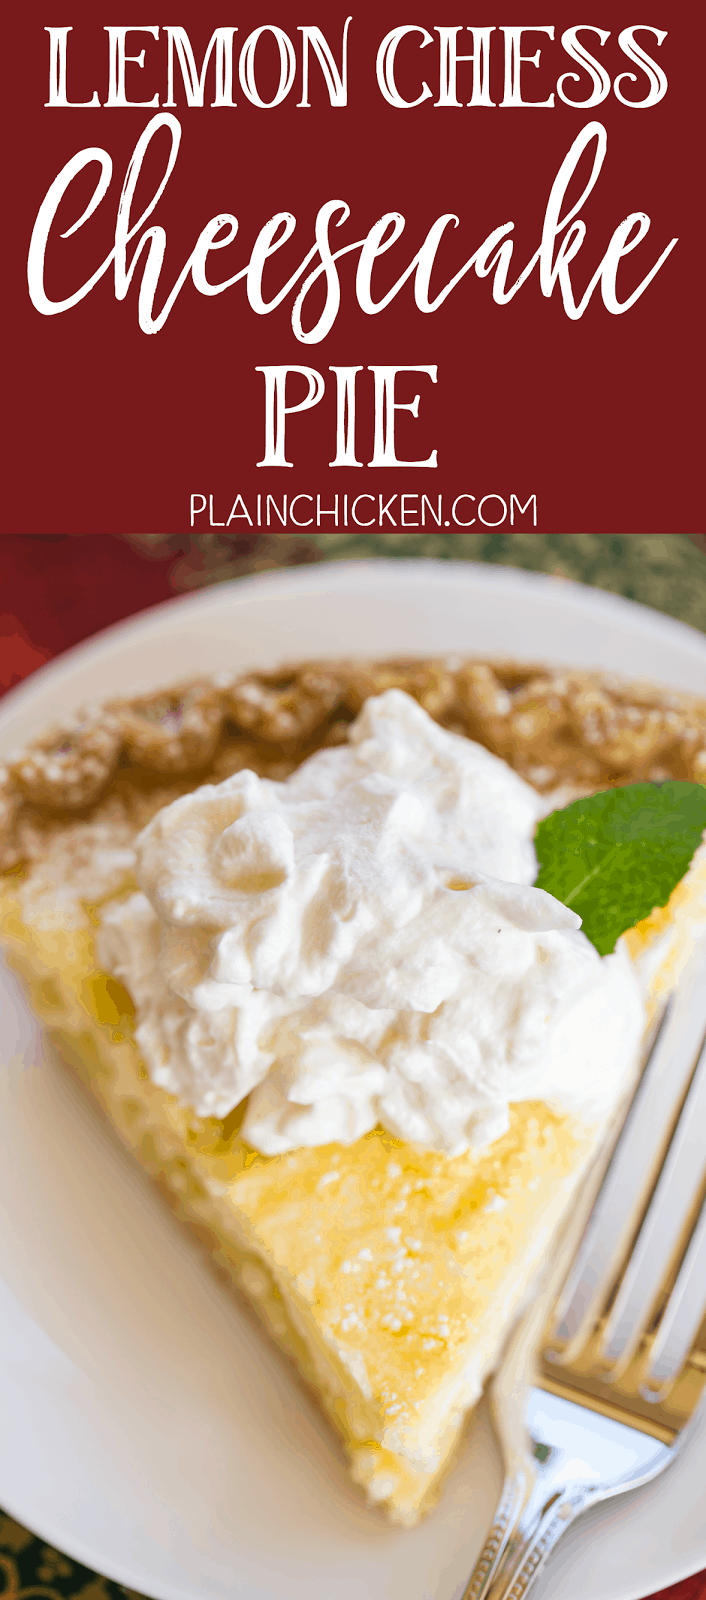 Lemon Chess Cheesecake Pie - two favorites in one dessert! Quick cheesecake layer on the bottom and a delicious homemade lemon chess pie on top! Pie crust, cream cheese, sugar, eggs, butter, milk, lemon juice, lemon rind, flour, cornmeal. Can make ahead of time and refrigerate until ready to serve. Top with fresh homemade whipped cream. SO good! A MUST for your holiday meal!!